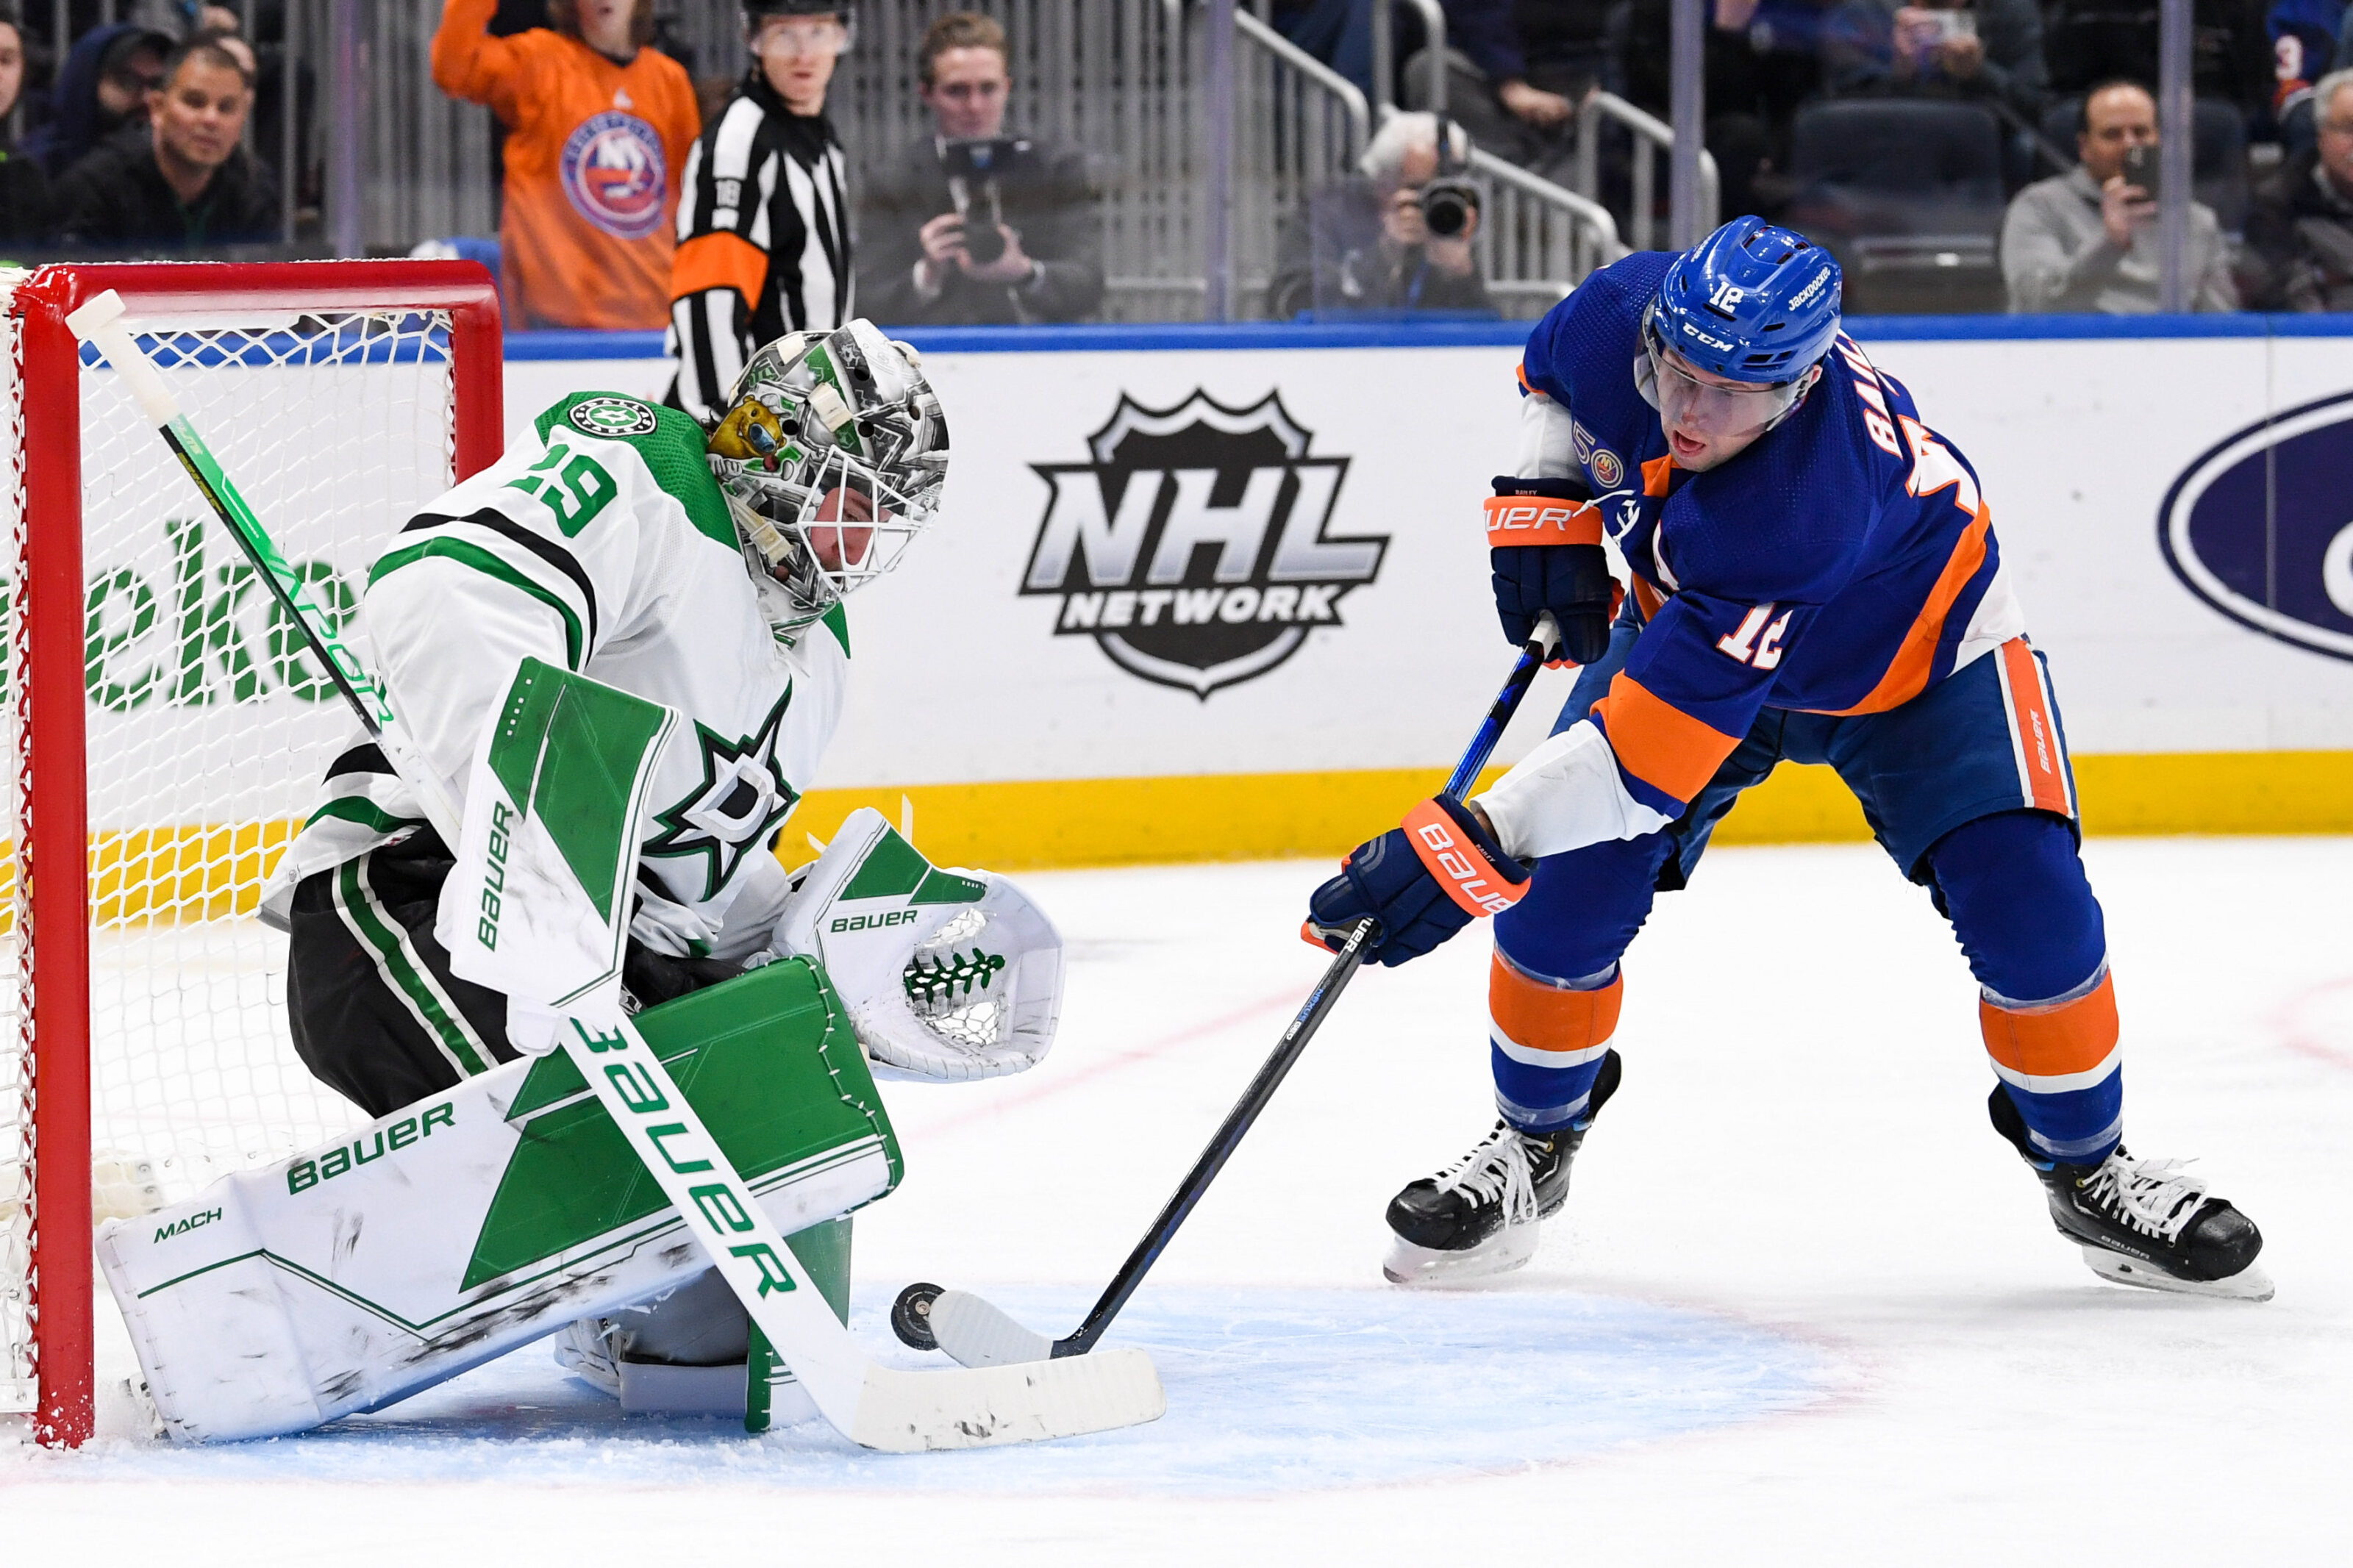 The Islanders are on the road again for a back-to-back against the